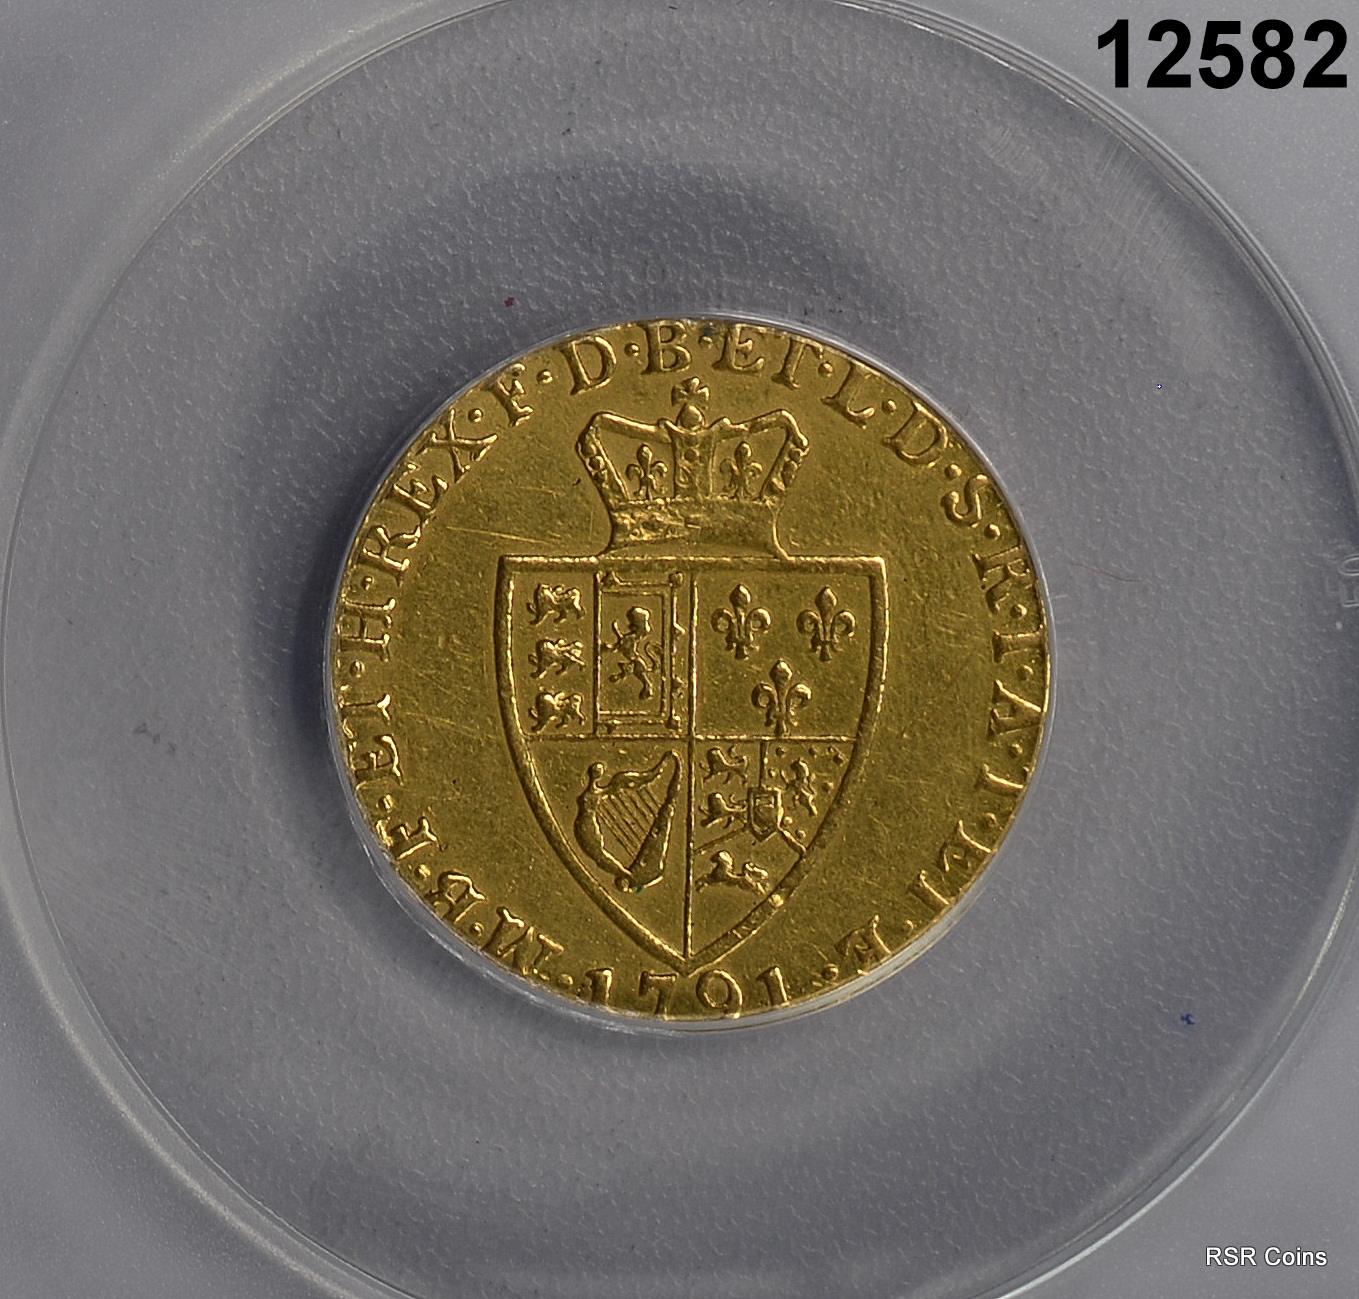 1791 GREAT BRITAIN 1 GUINEA 22 Ct GOLD COIN ANACS CERTIFIED VF20 DAMAGED#12582